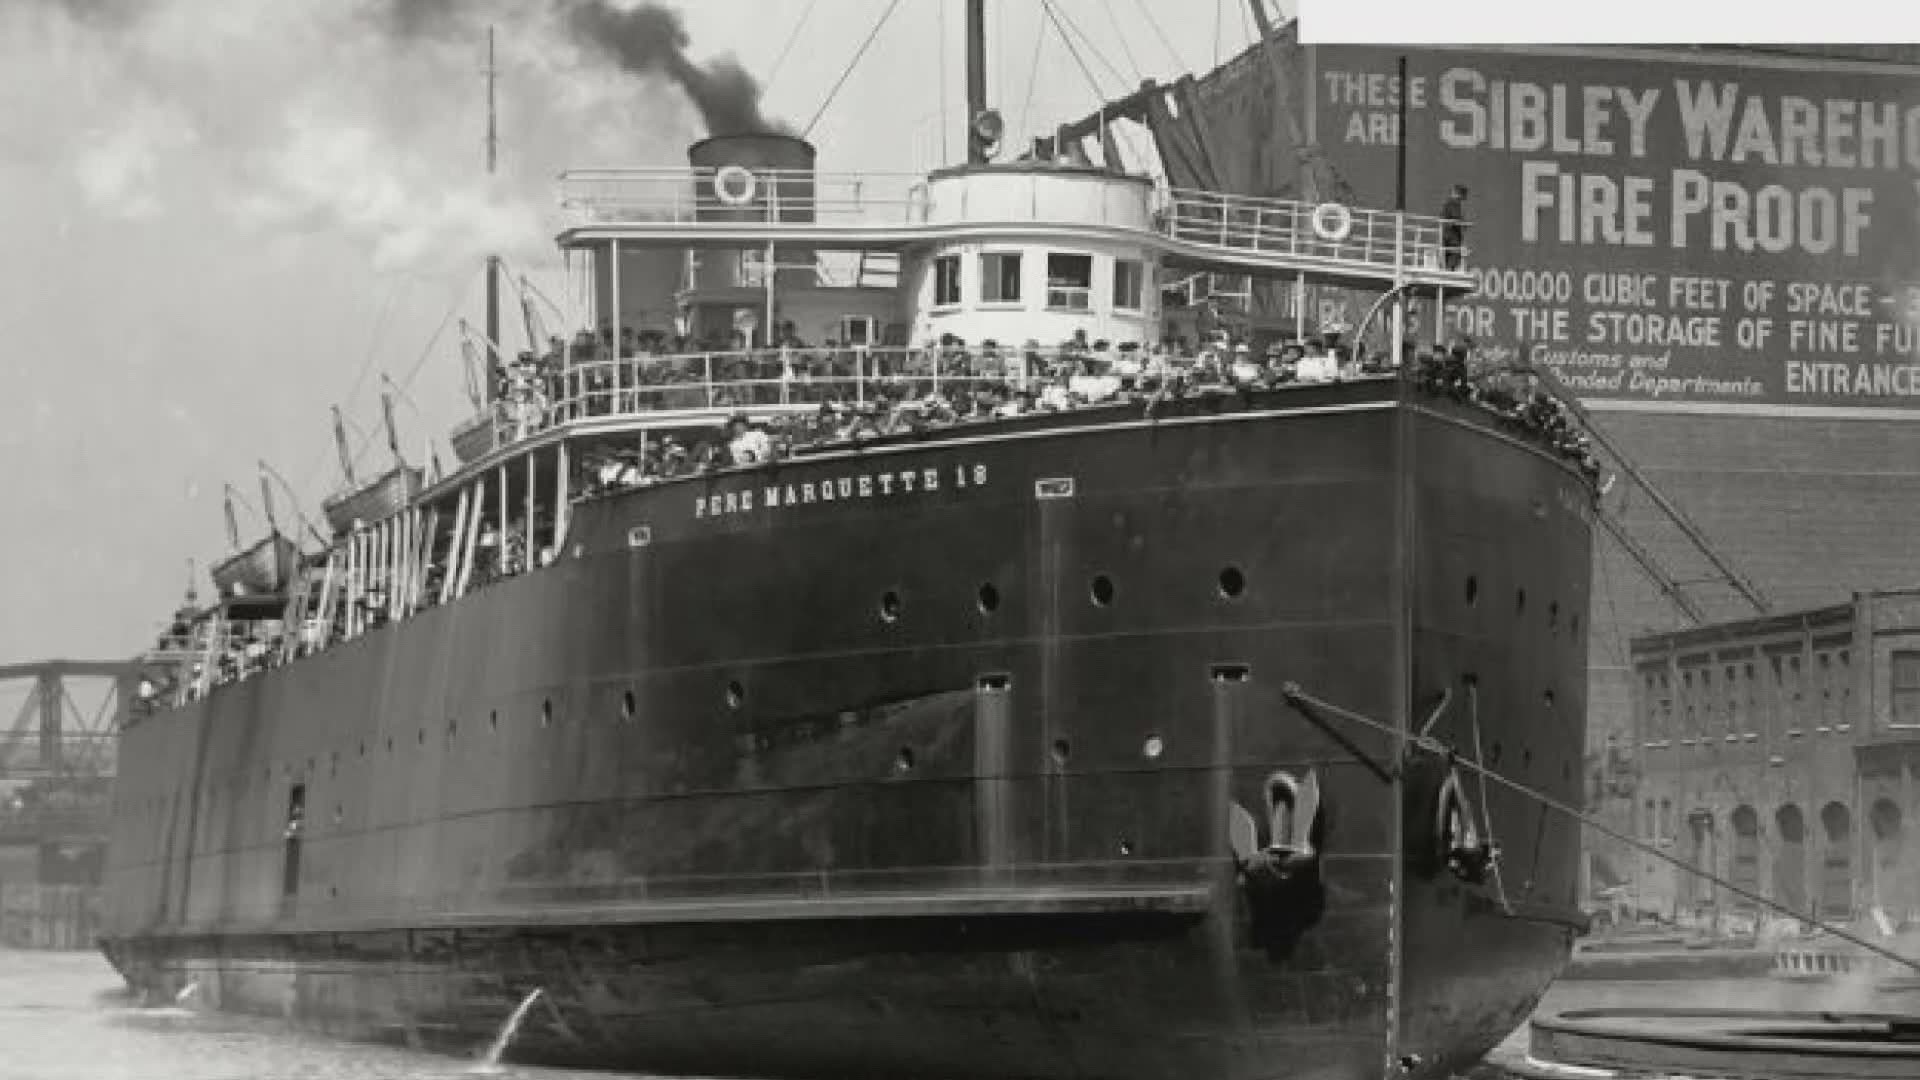 Considered to be the largest remaining Lake Michigan shipwreck not discovered, a Minnesota-based wreck-hunting crew found the 'Pere Marquette 18' ferry.